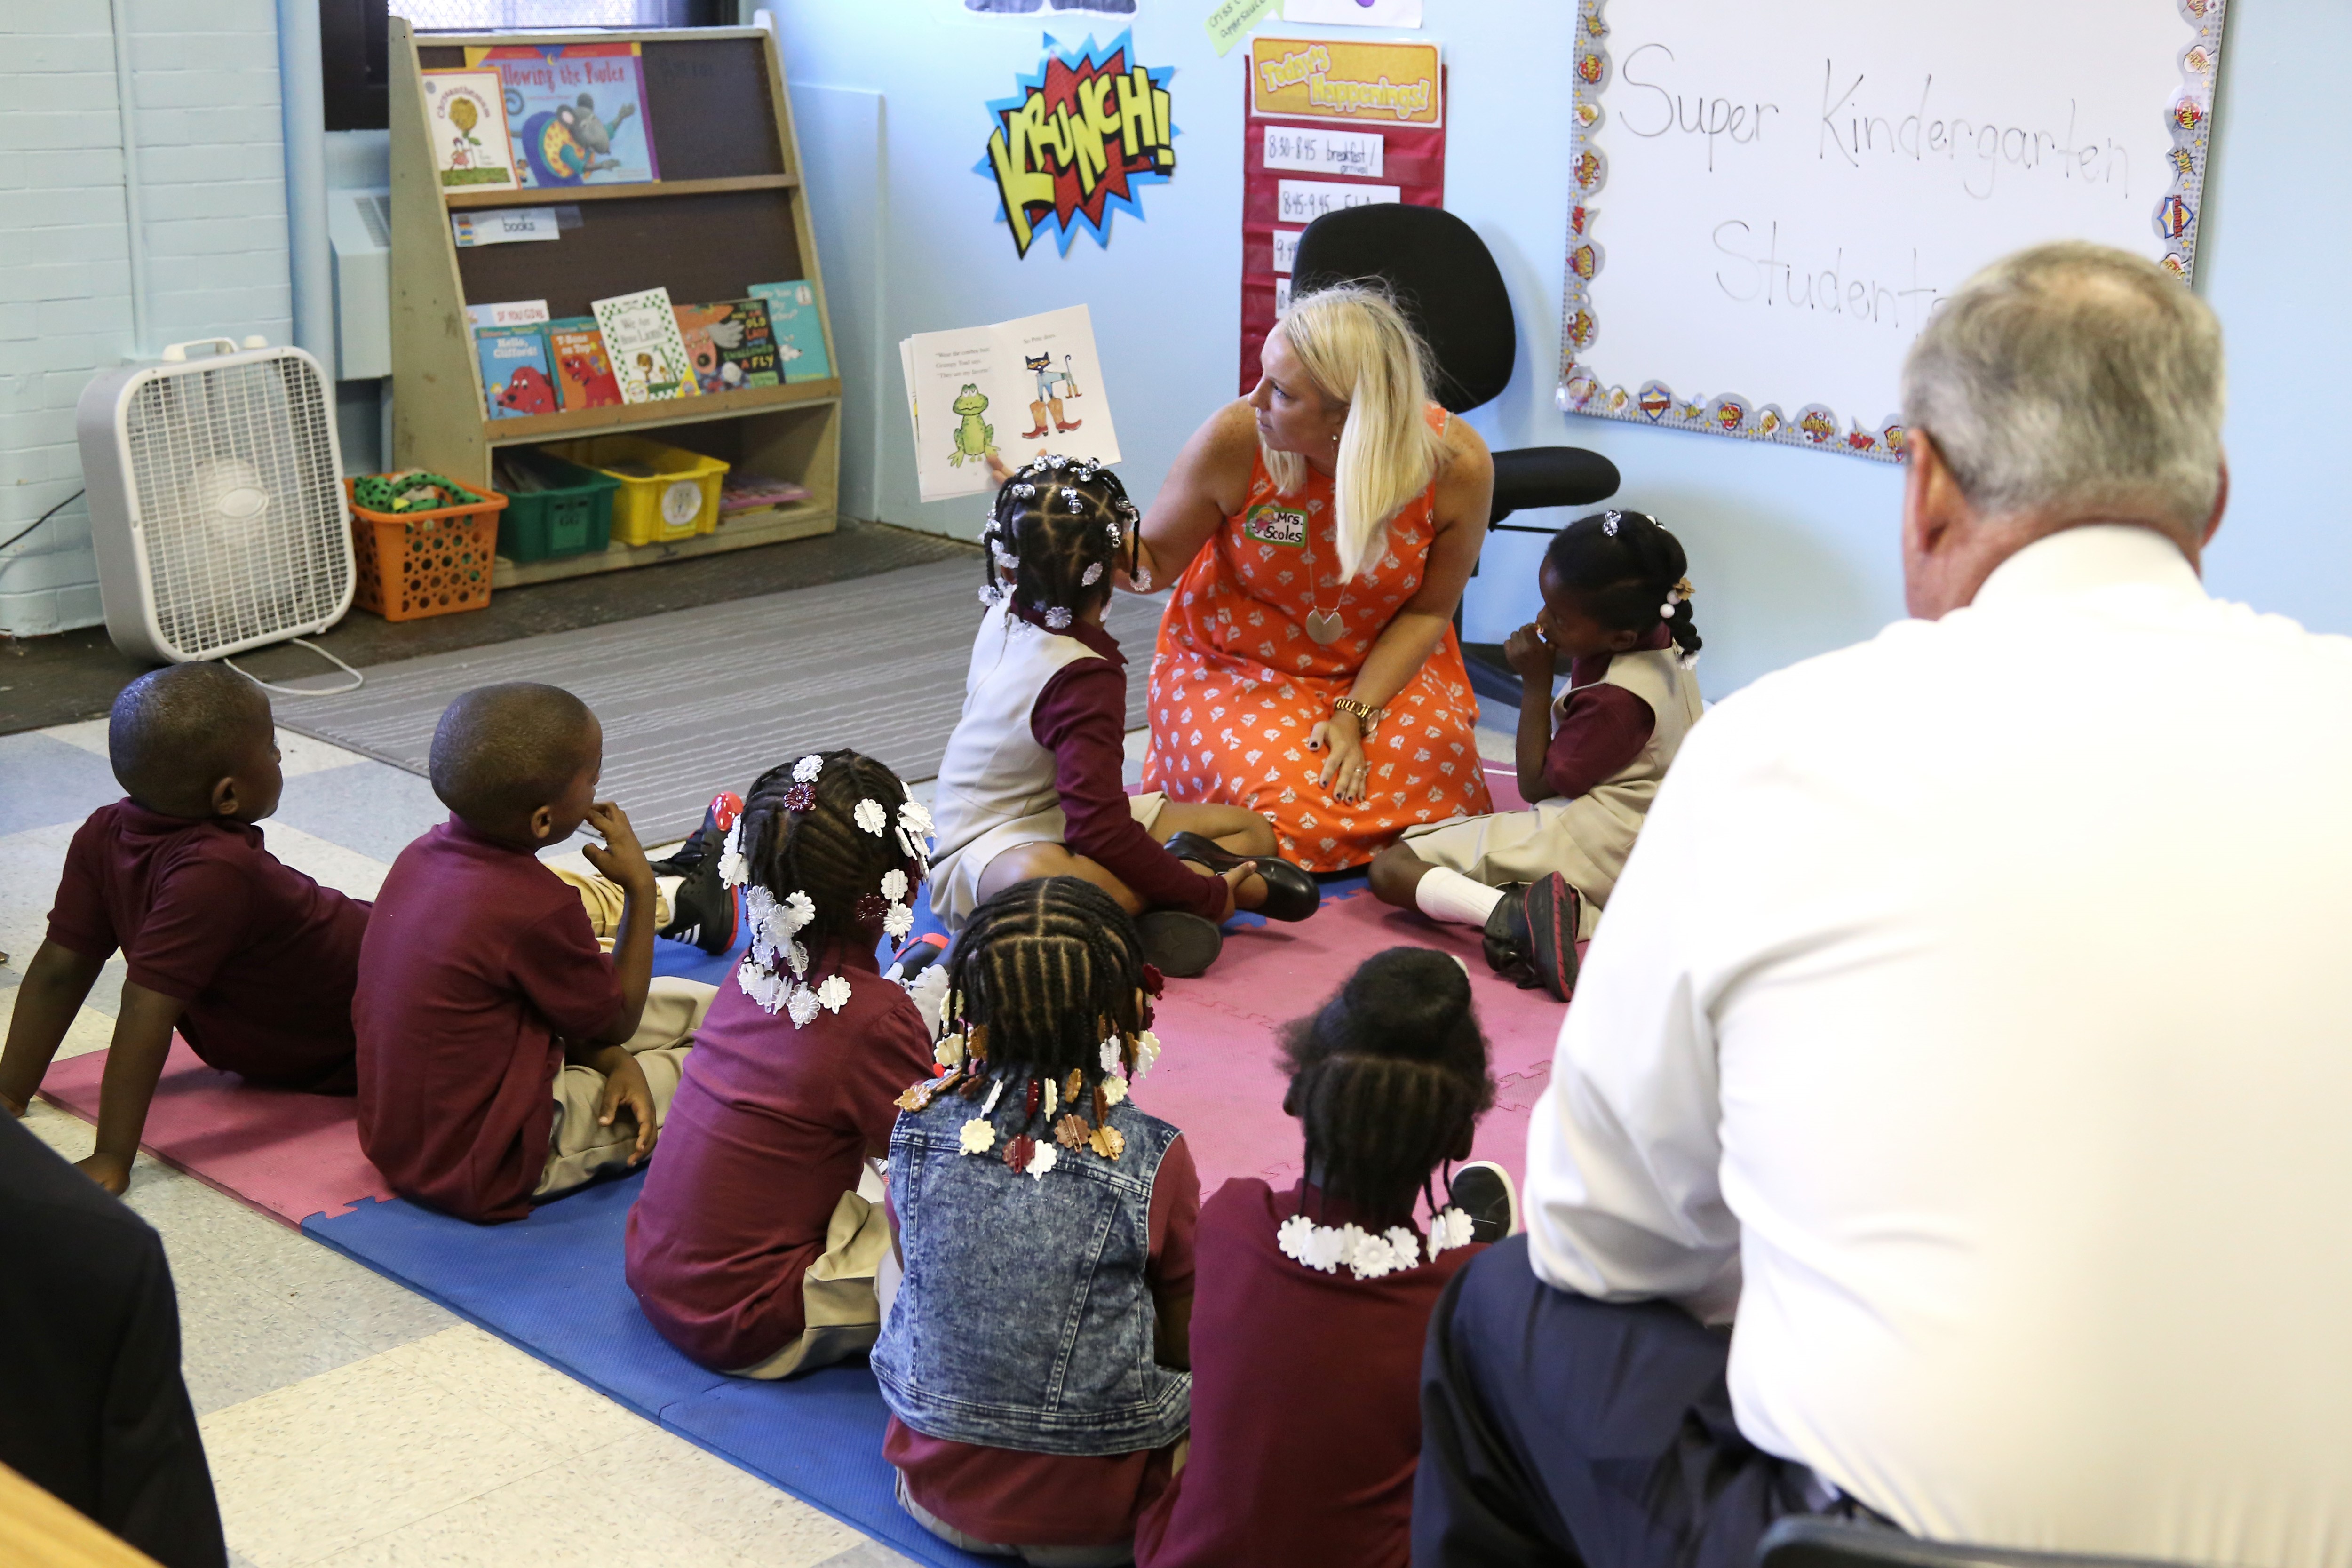 Children sitting in a semi-circle around a teacher holding a book as the mayor watches.